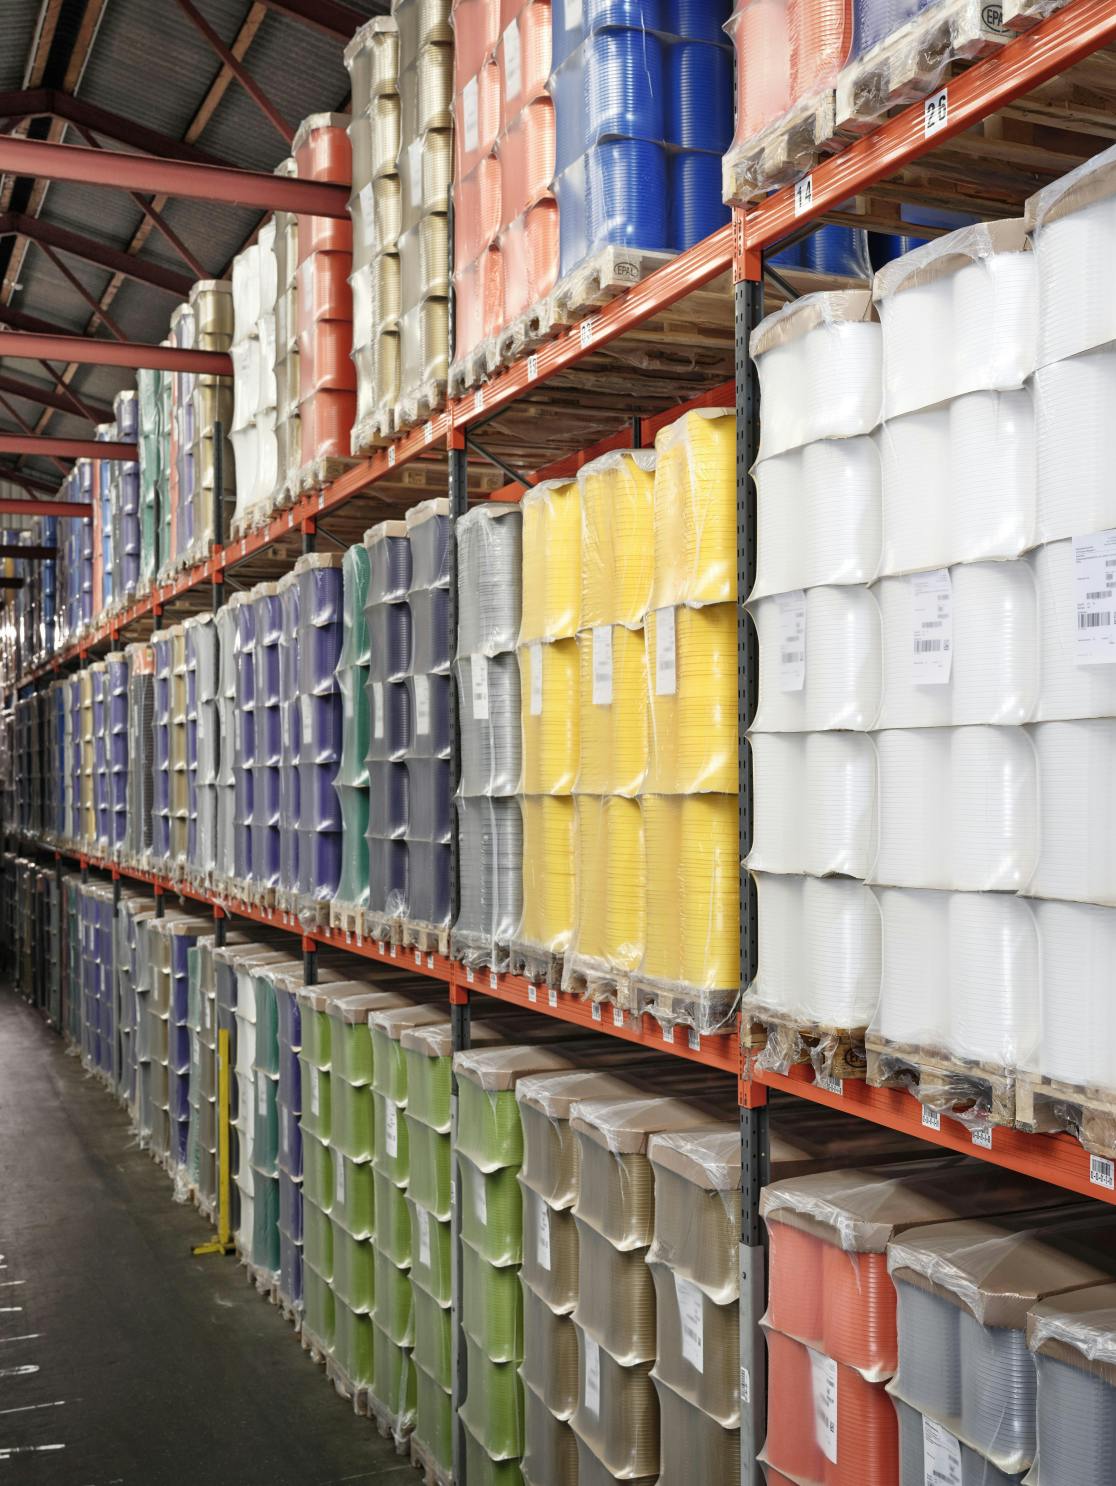 ALPLAIndustrial has a huge variety of different coloured buckets